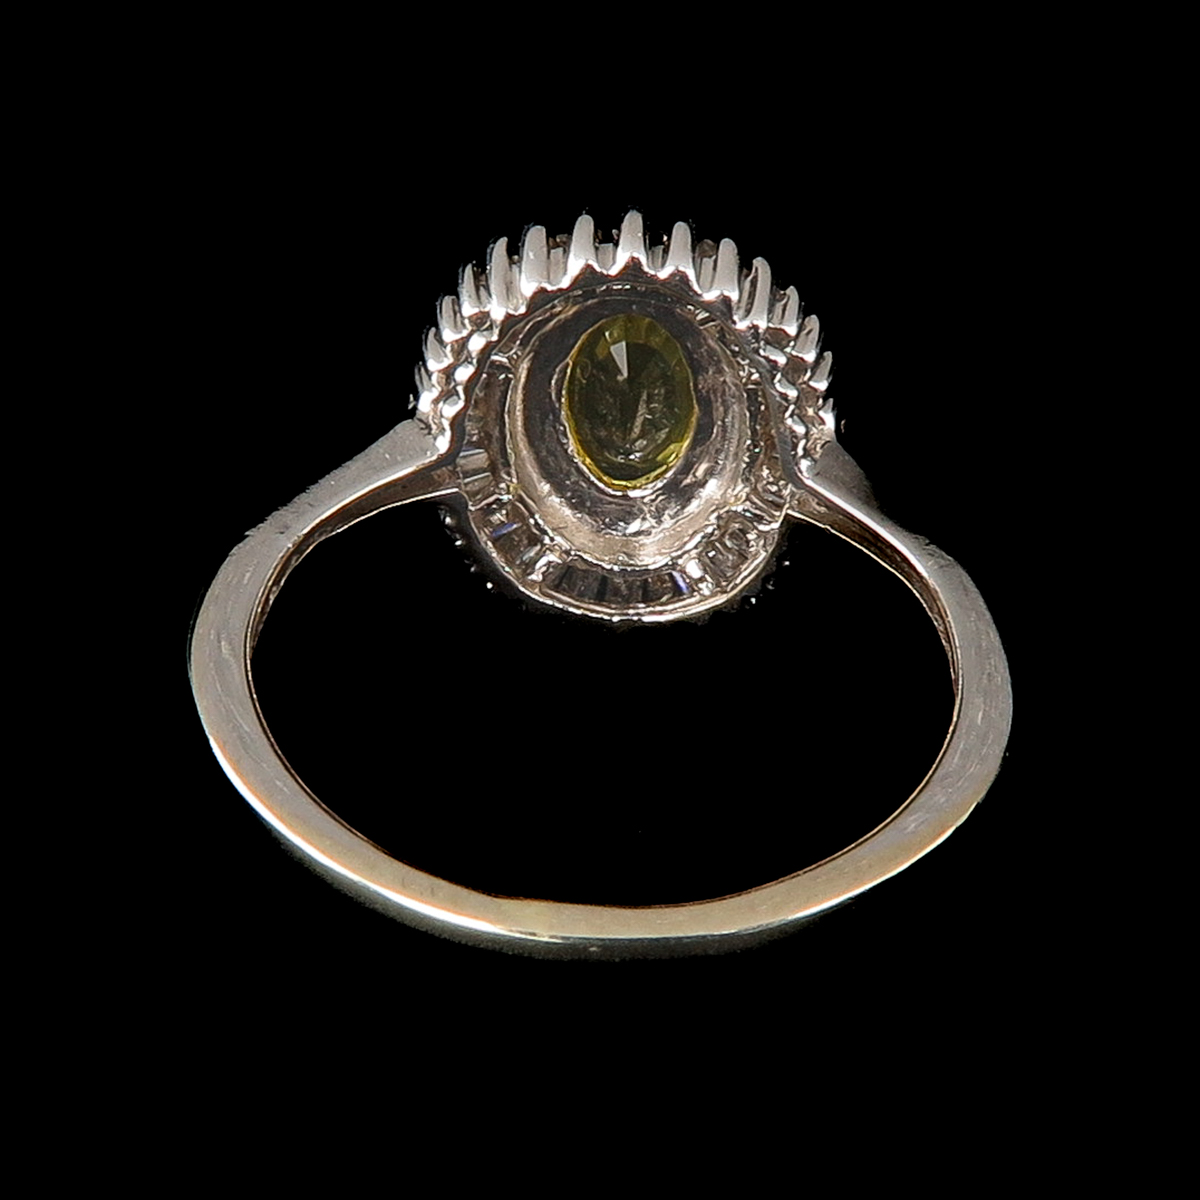 A Ladies Diamond and Citrine Ring - Image 3 of 3